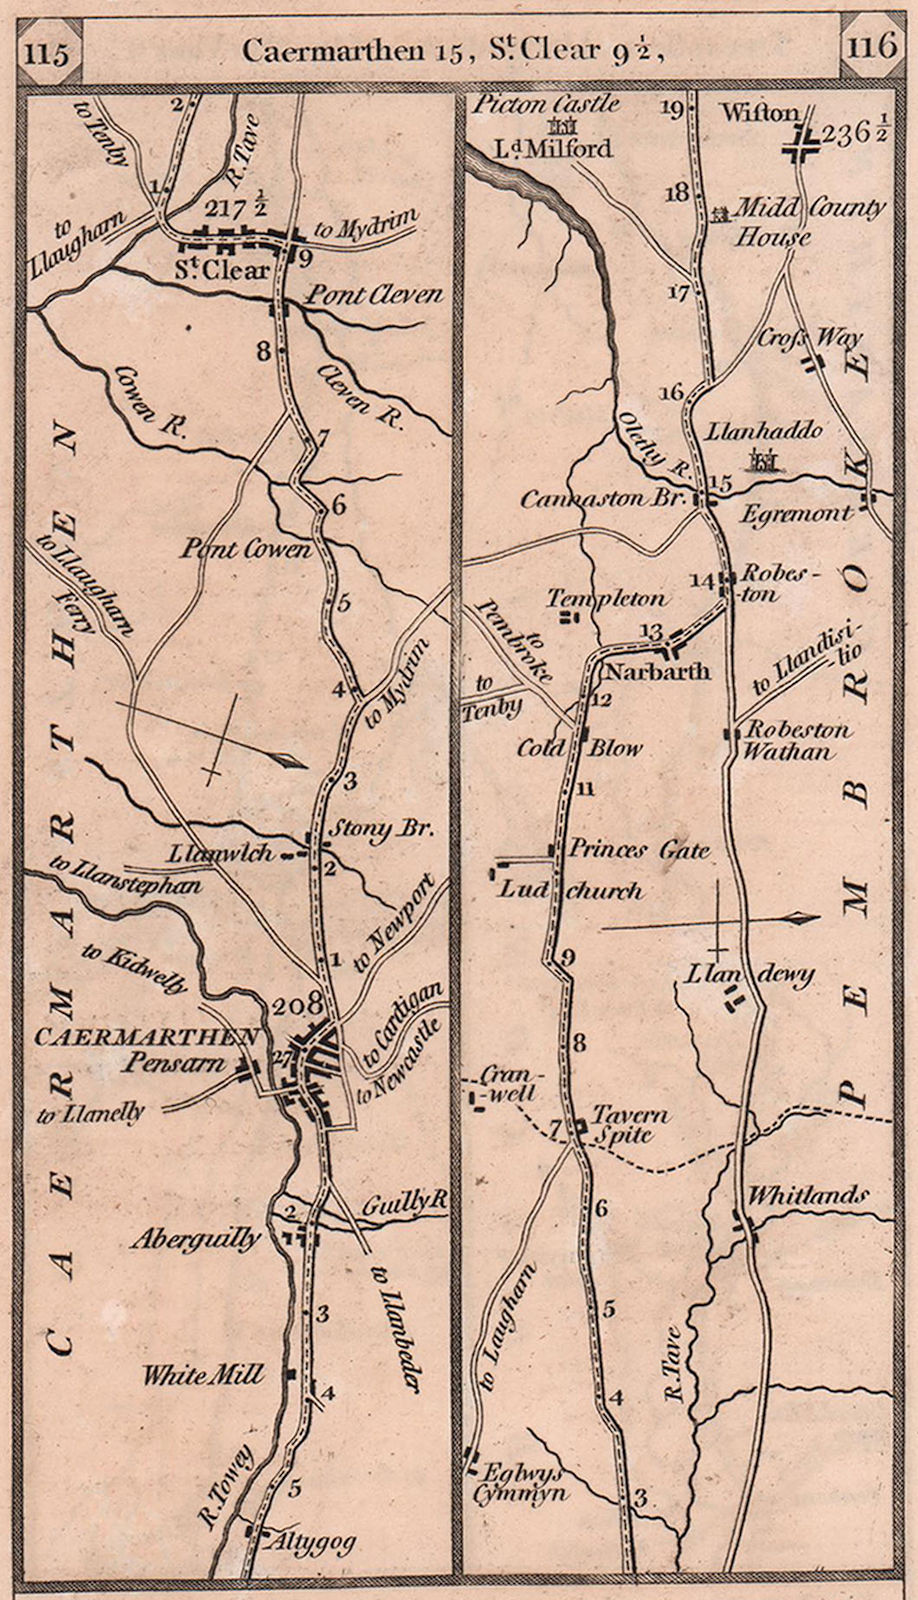 Carmarthen - St. Clears - Narberth - Wiston road strip map PATERSON 1803